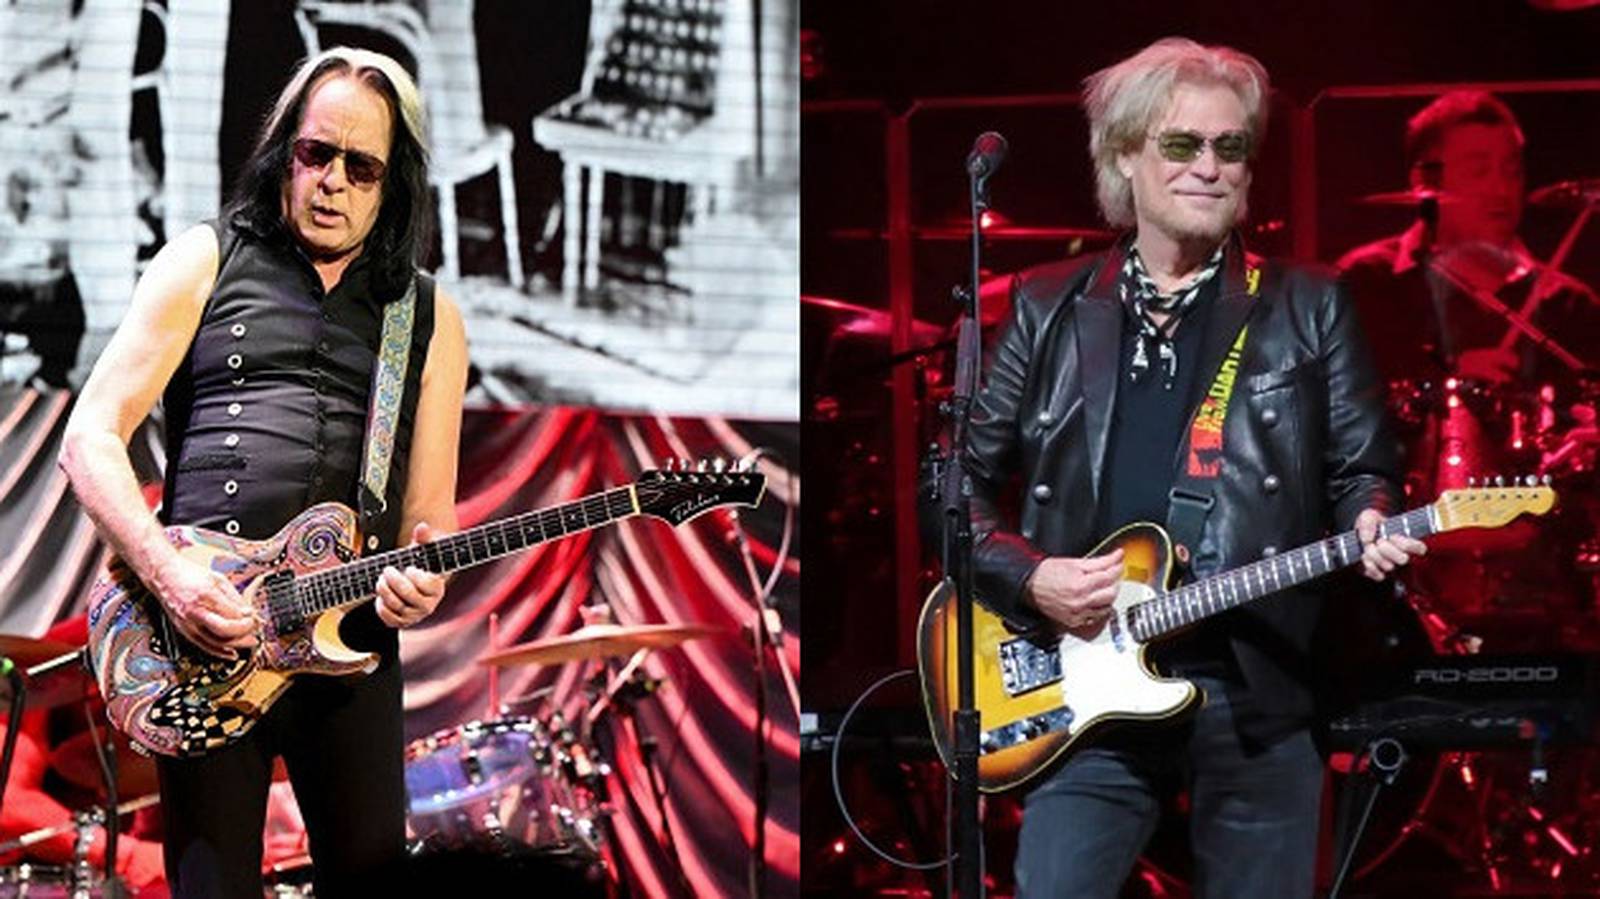 Todd Rundgren says tour with Daryl Hall probably will be "the high